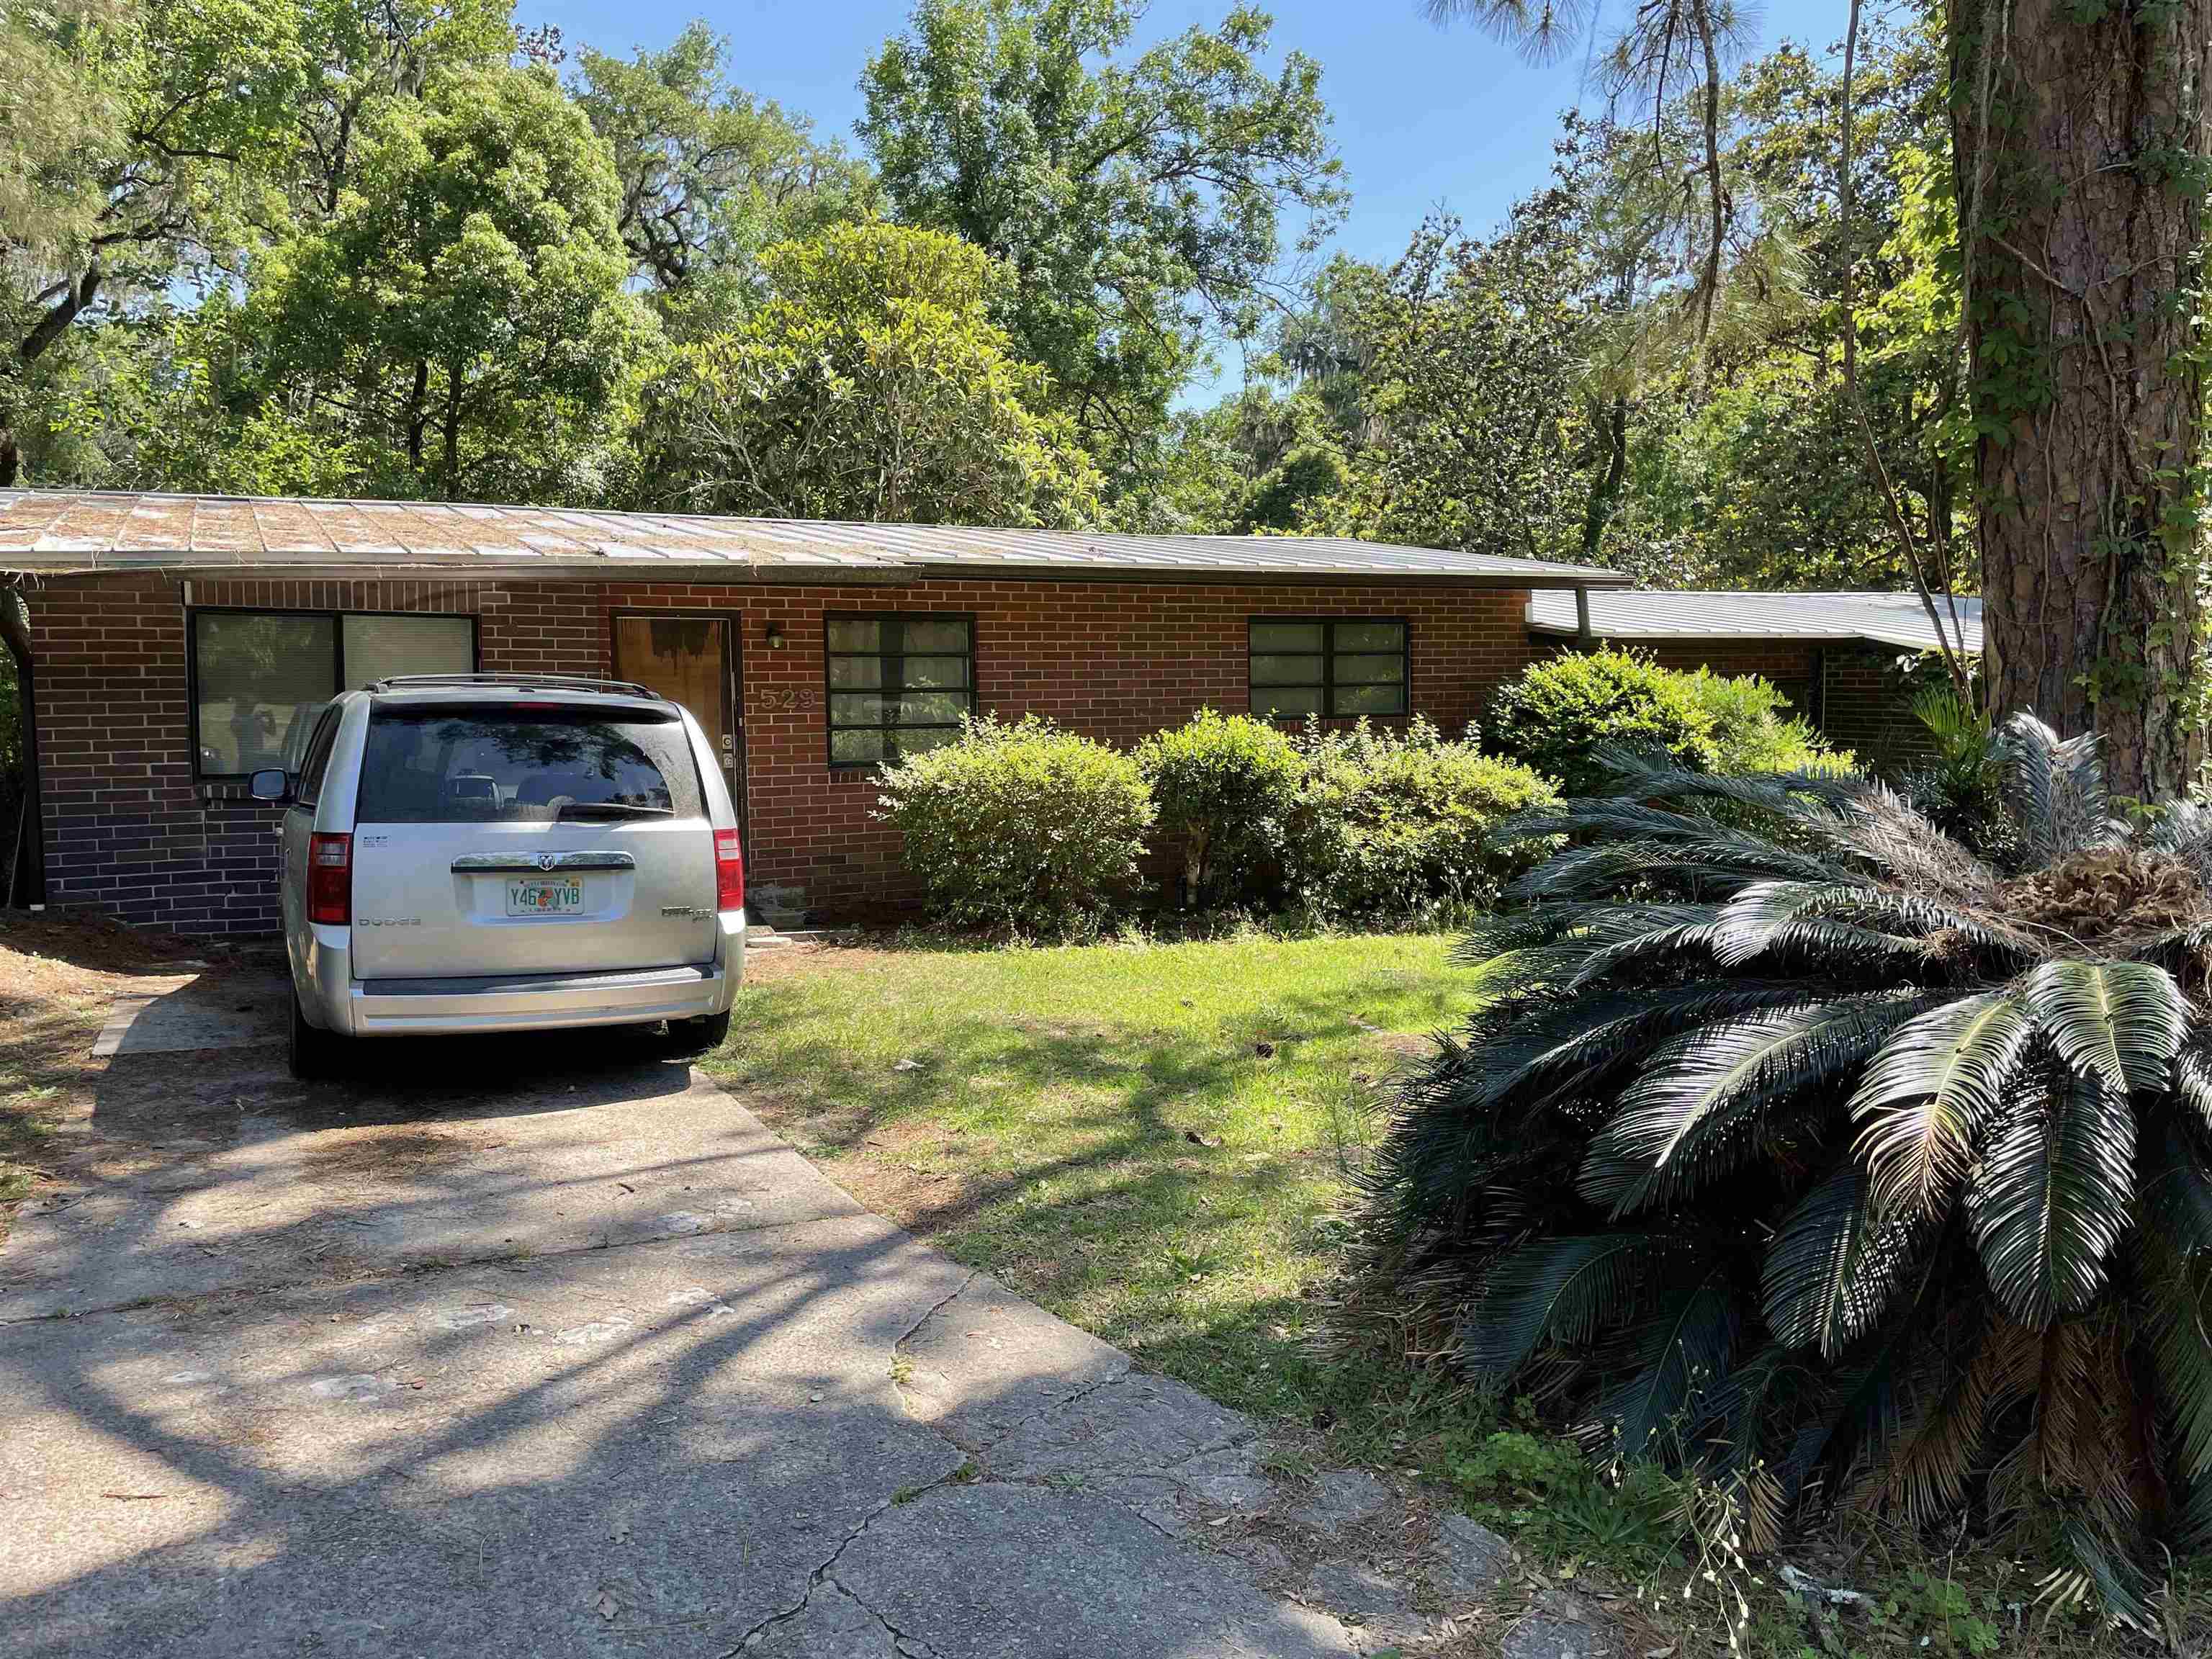 Bring your investors! Over $47k Potential Gross Net Income. All brick duplex with a separate apartment underneath, in PRIME Myers Park! Walk to Cascades Park and downtown within minutes. Close to FSU, FAMU, Greenwise, Gaines street shops, and more..... Each unit of the duplex is 3 bedroom/2 bathroom, while the apartment underneath is a 2 bedroom/2 bathroom. One of the duplex unit's hallway bathroom has been remodeled in 2022. Metal Roof 2017. Super well maintained and has been cared for under property management. Adjoining parcel with similar duplex, as well as a tiny home rather than an apartment below that has just been currently leased at market rent, also for sale. Don't miss this opportunity to have a prime investment location in the heart of Tallahassee. Bring your offers! All measurements are approximate and should be independently reviewed and verified for accuracy.